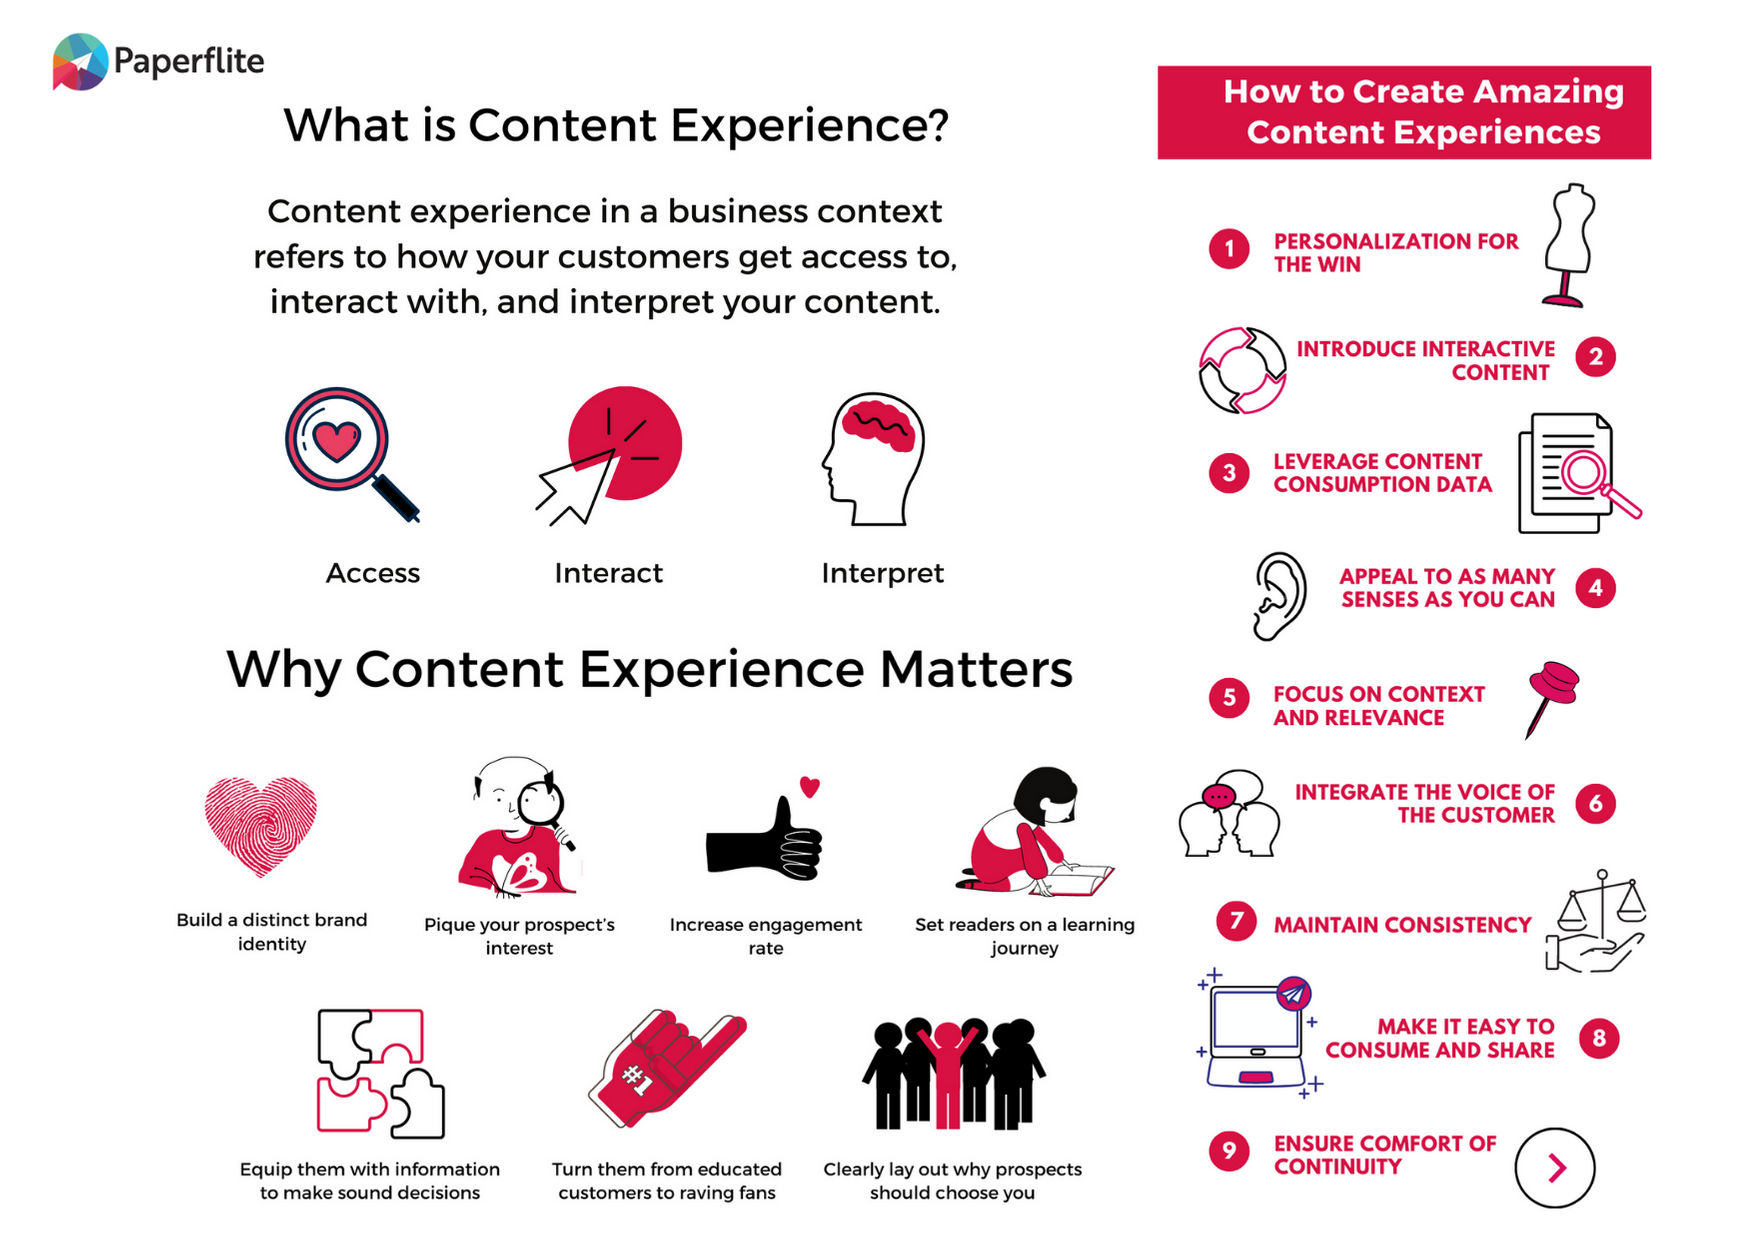 content experience cheat sheet_paperflite